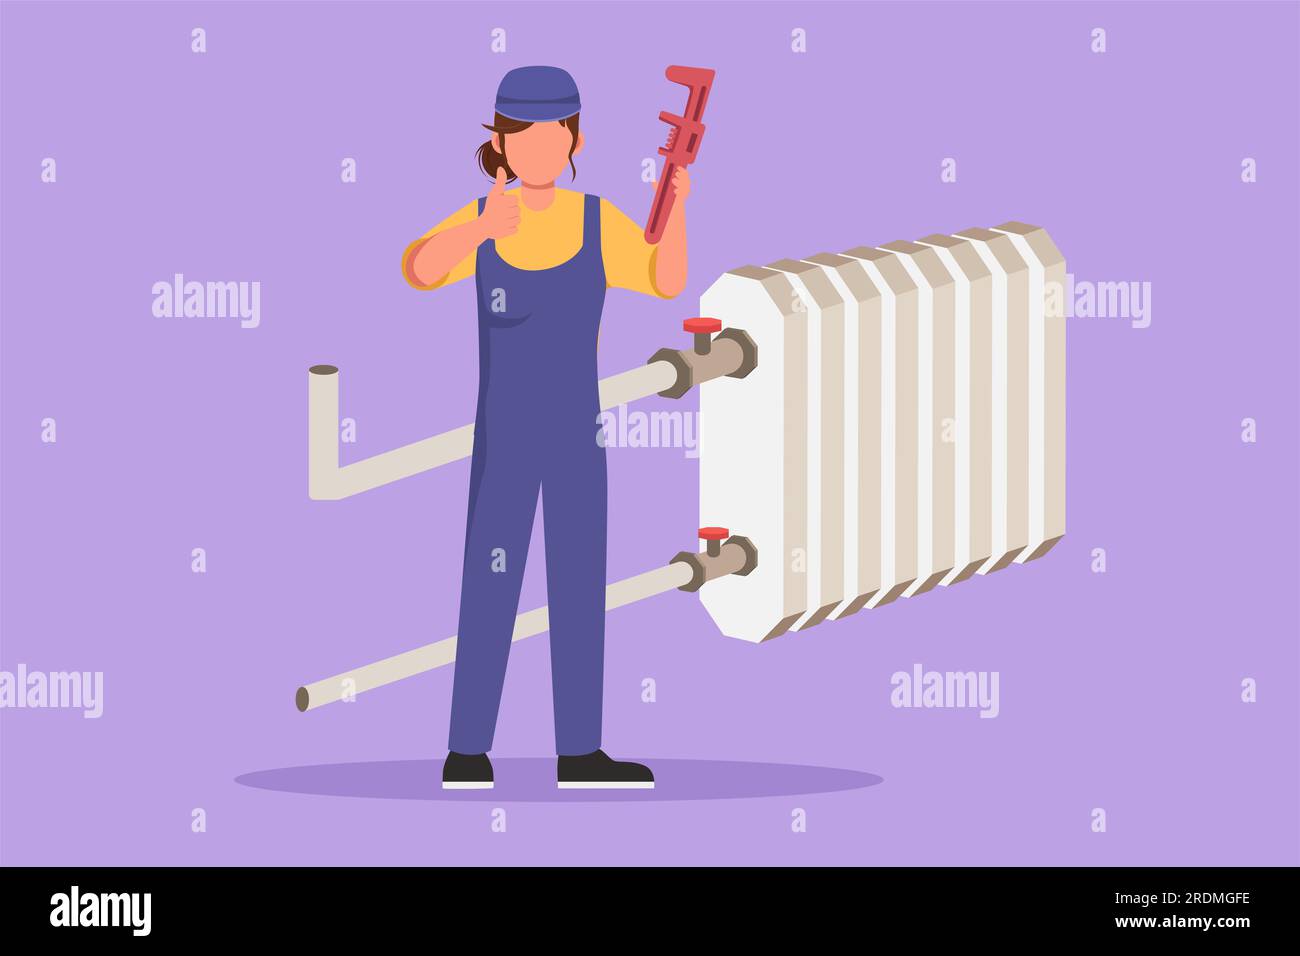 Cartoon flat style drawing female plumber standing holding wrench with thumb up gesture was ready to work on repairing leaking drain in houses drains Stock Photo